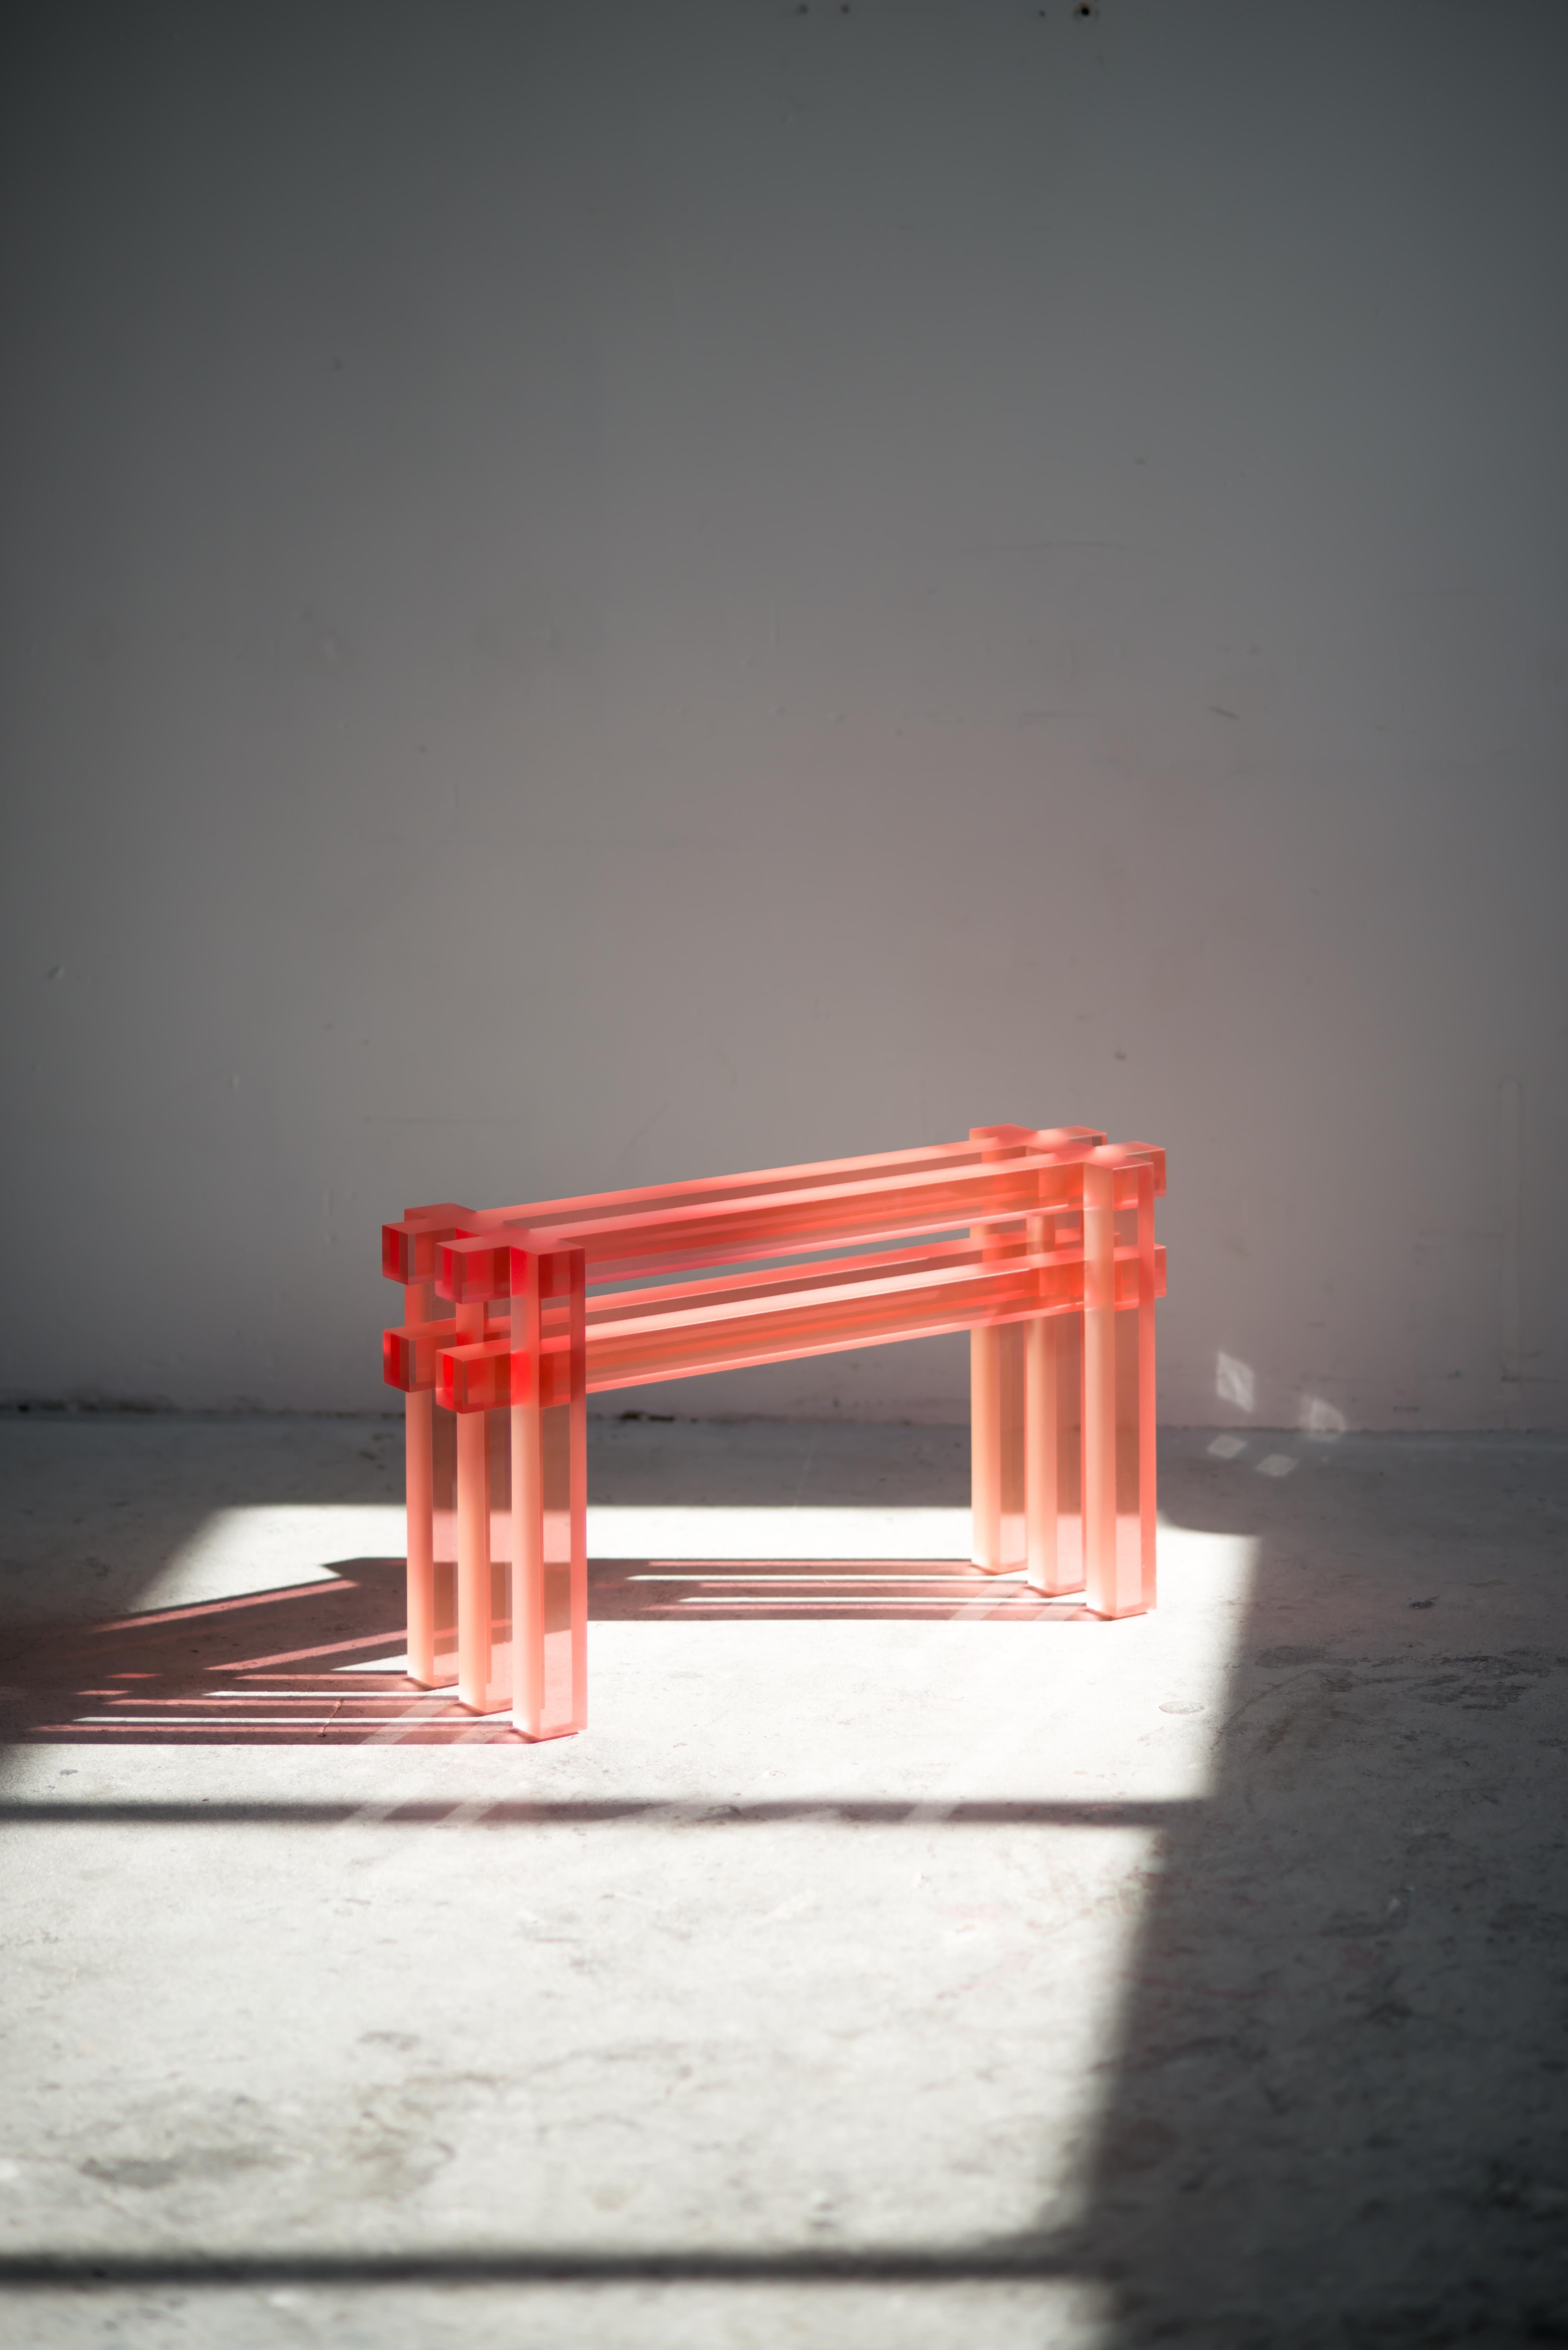 Short bench by Laurids Gallée
Dimensions : W 80 x D 25 x H 45 cm
Materials: Resin
Weight: 34 kg

Born in Austria in 1988, Laurids Gallée is based in Rotterdam. After studying Anthropology in Vienna, he moves to the Netherlands, where he graduates